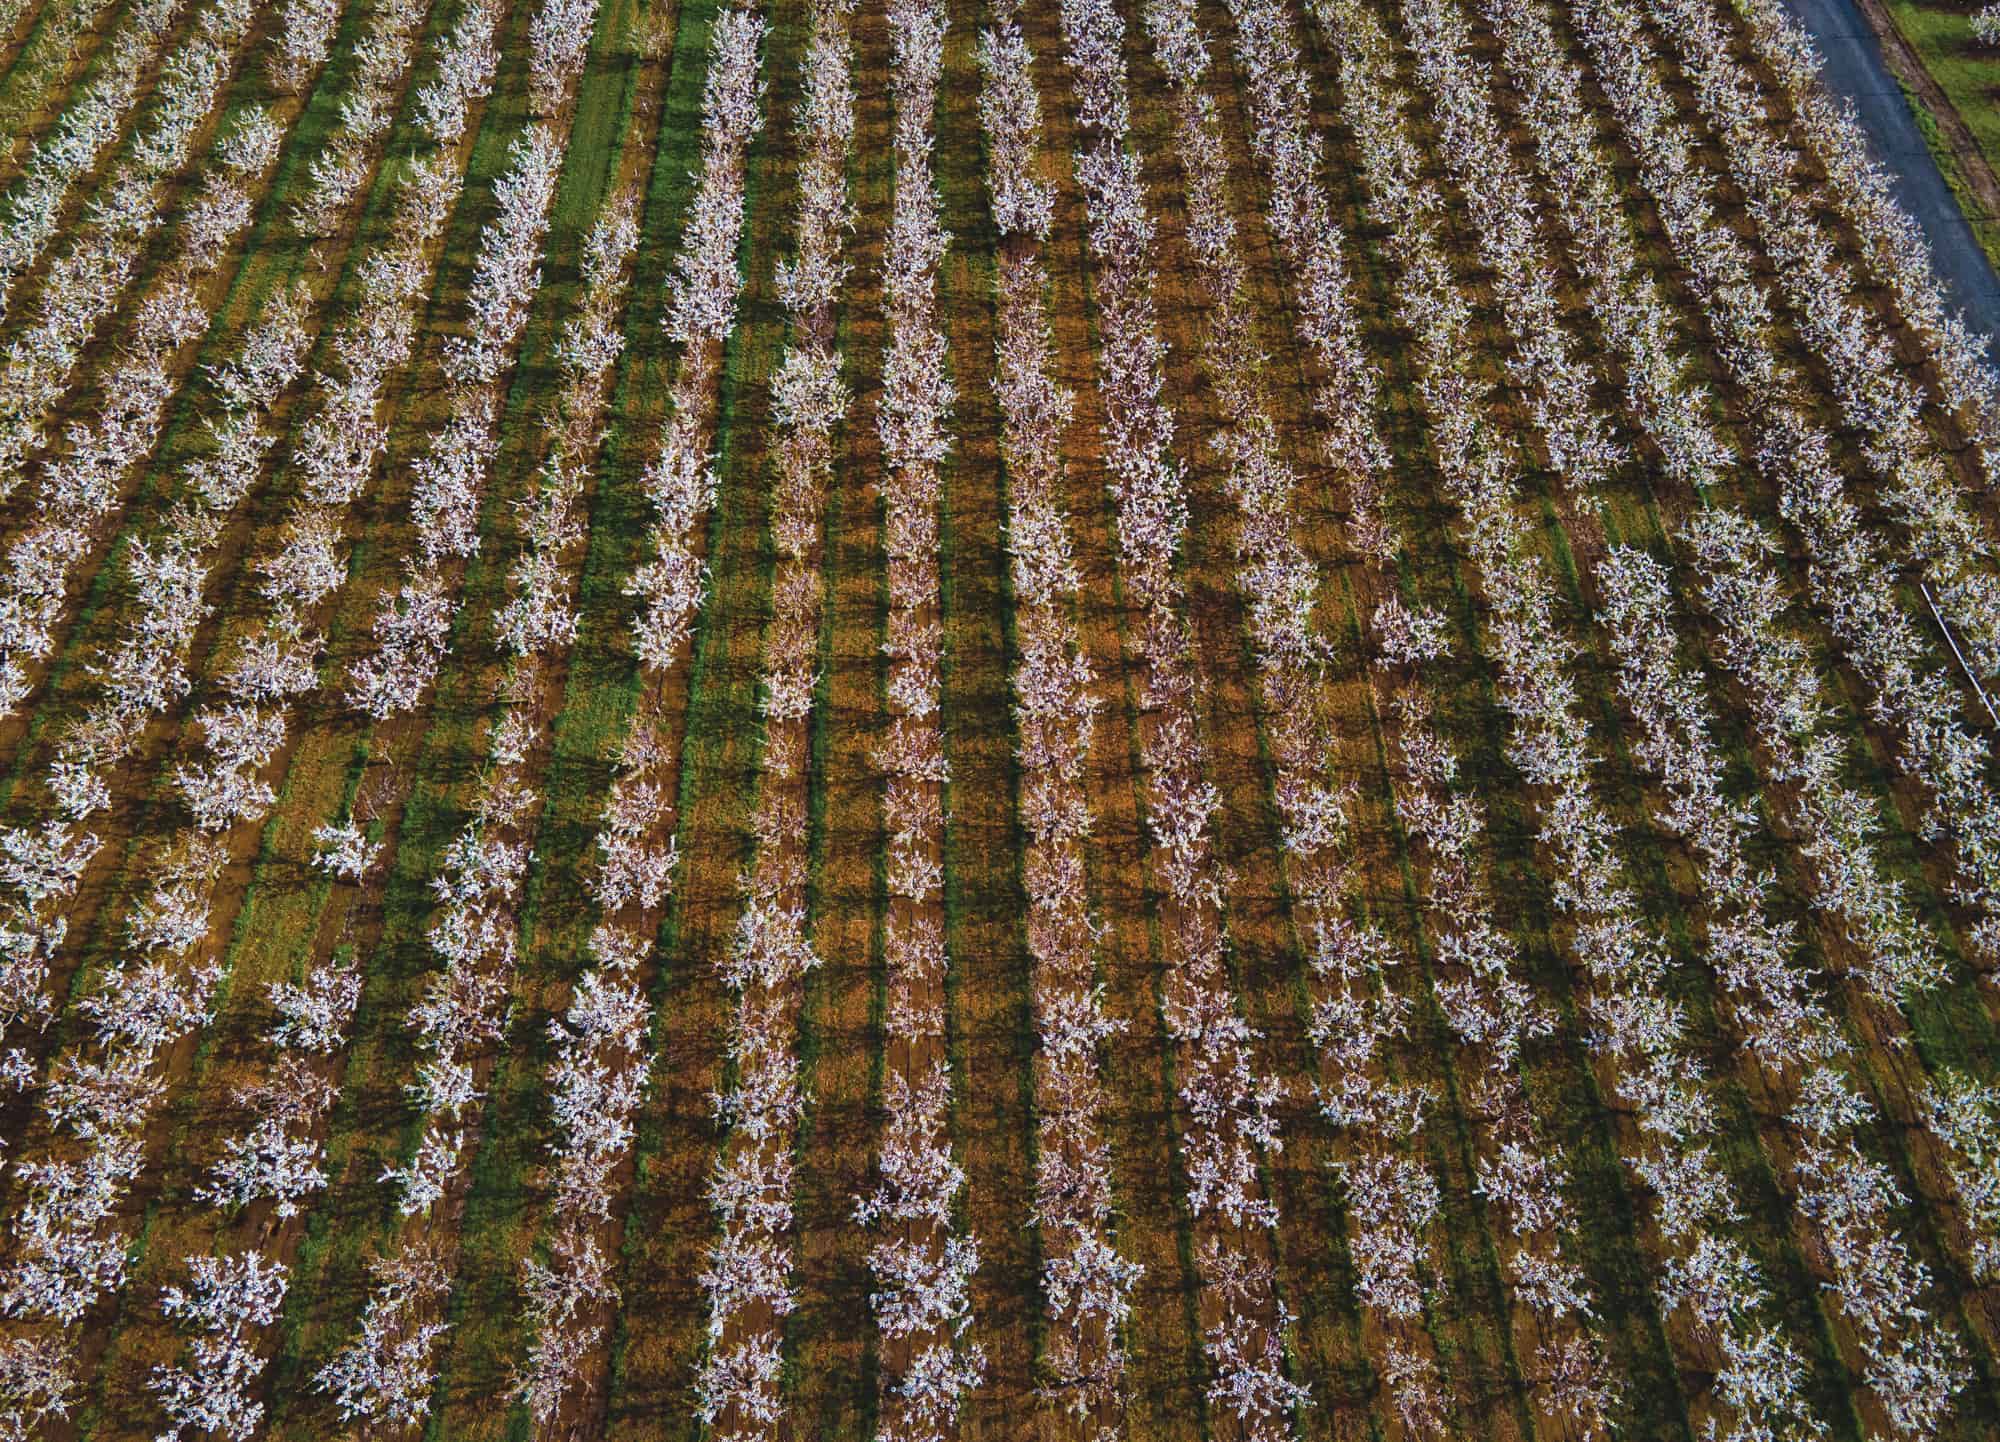 Hood River Cherry Company’s orchards in bloom in May. High season for cherries typically occurs in July and August.